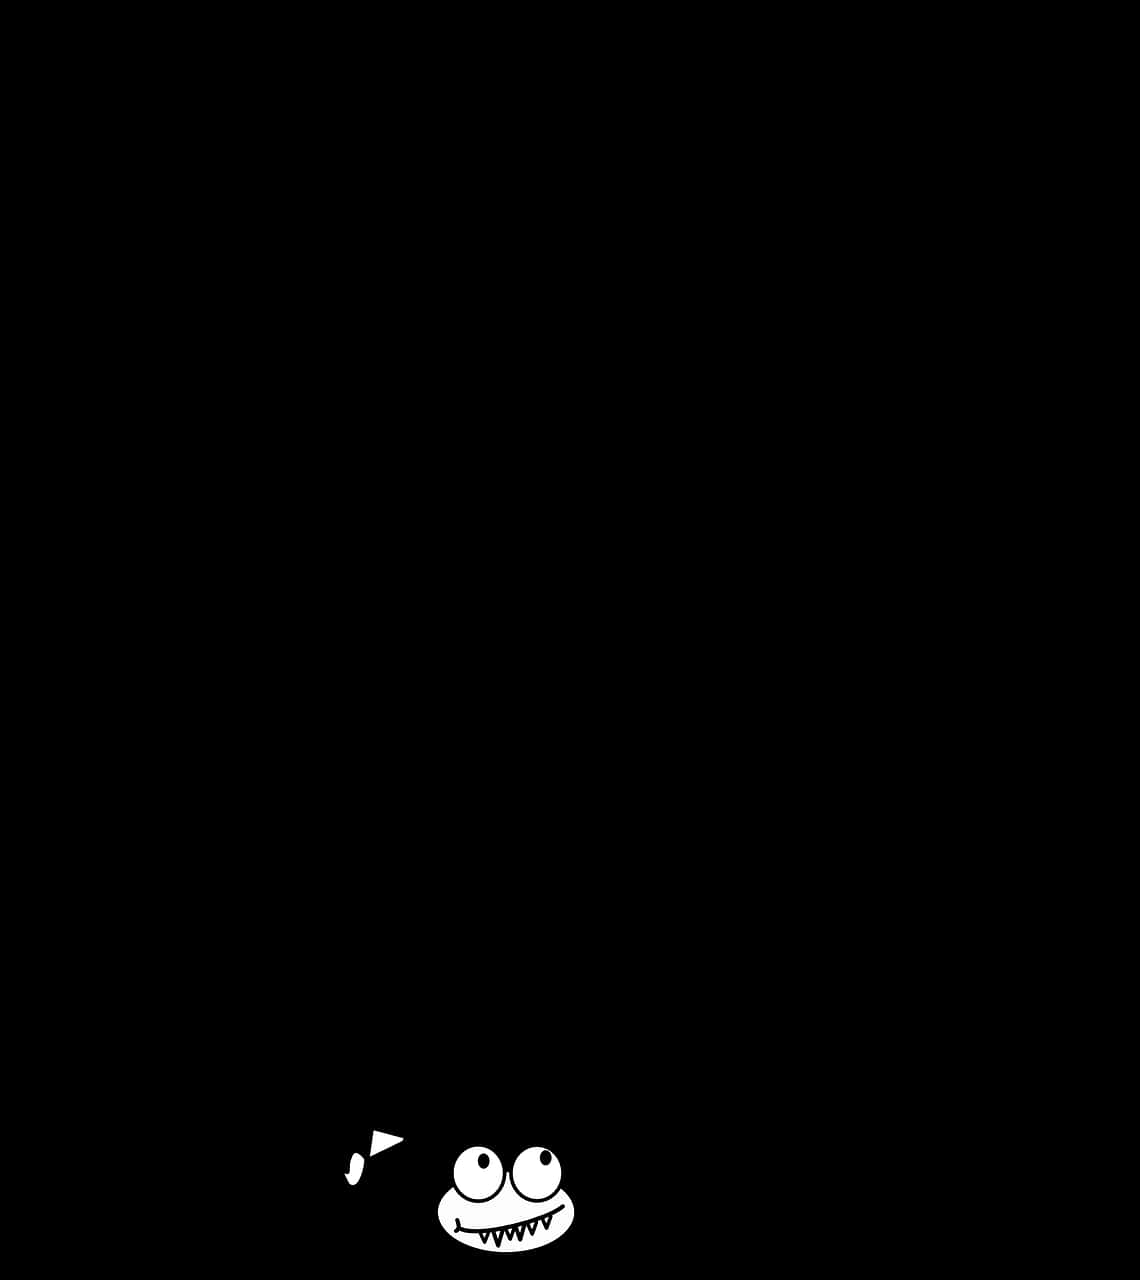 A Cartoon Character In A Black Background